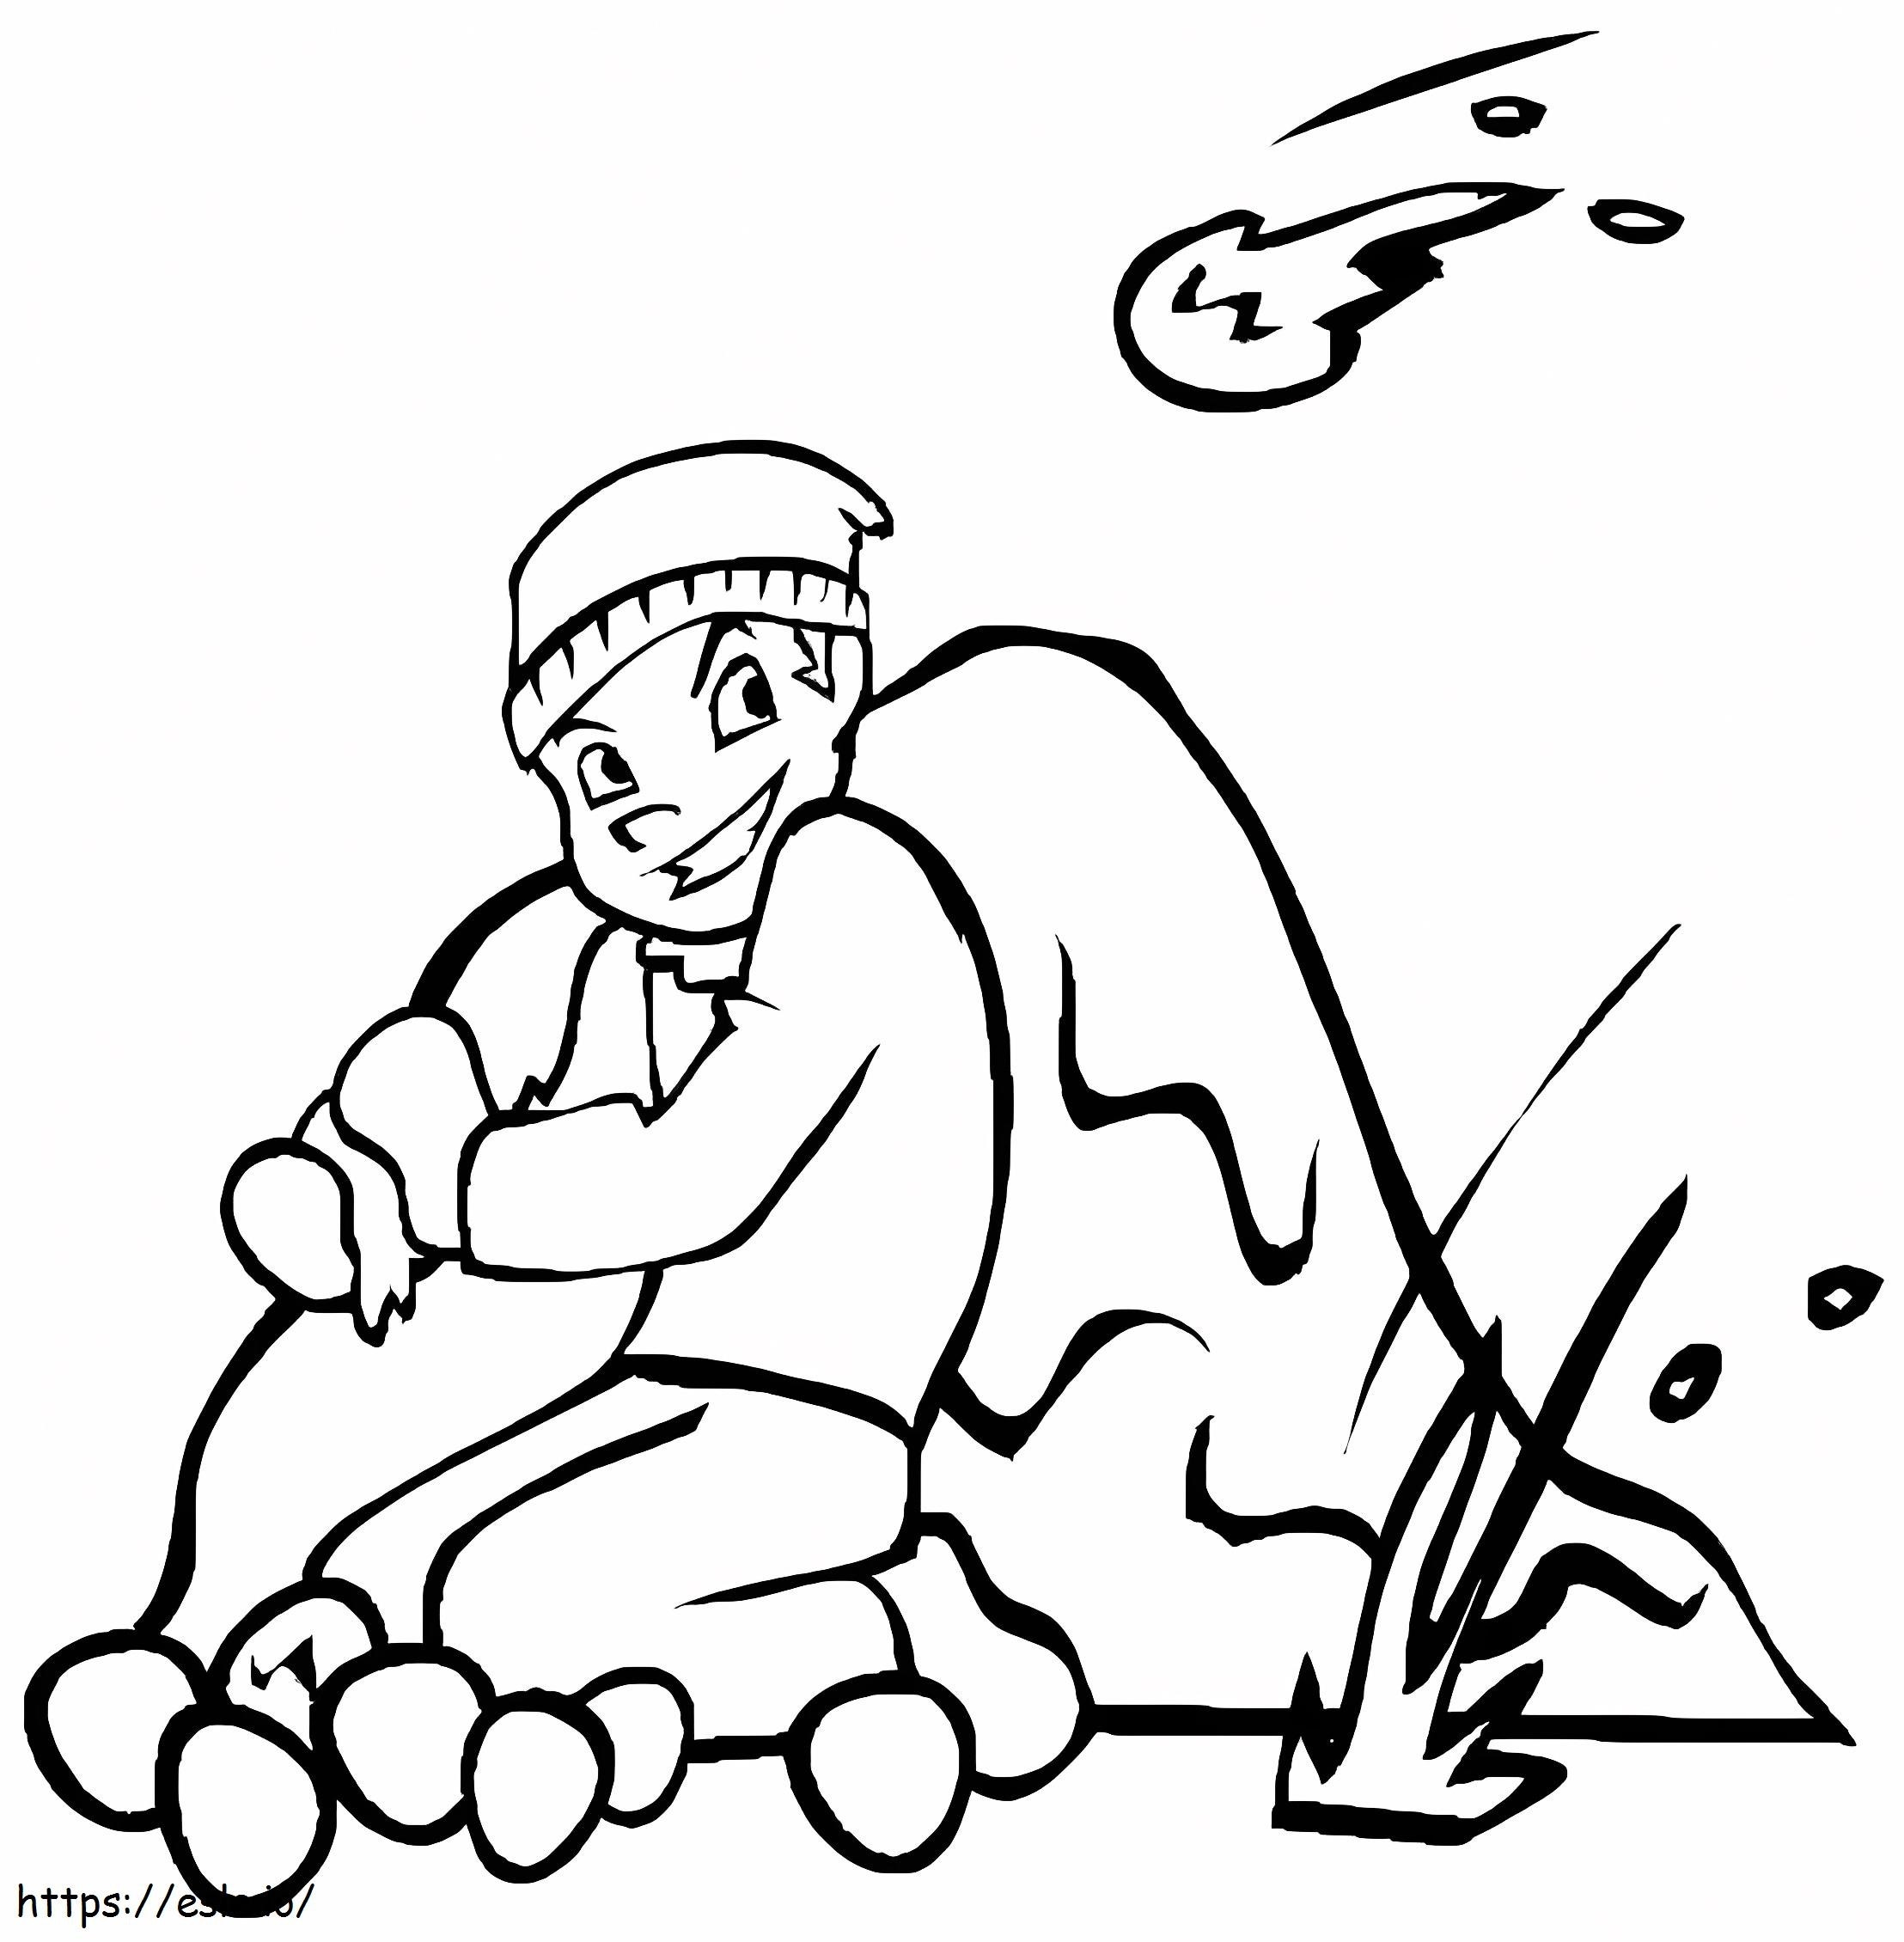 Free Snowball Fight coloring page